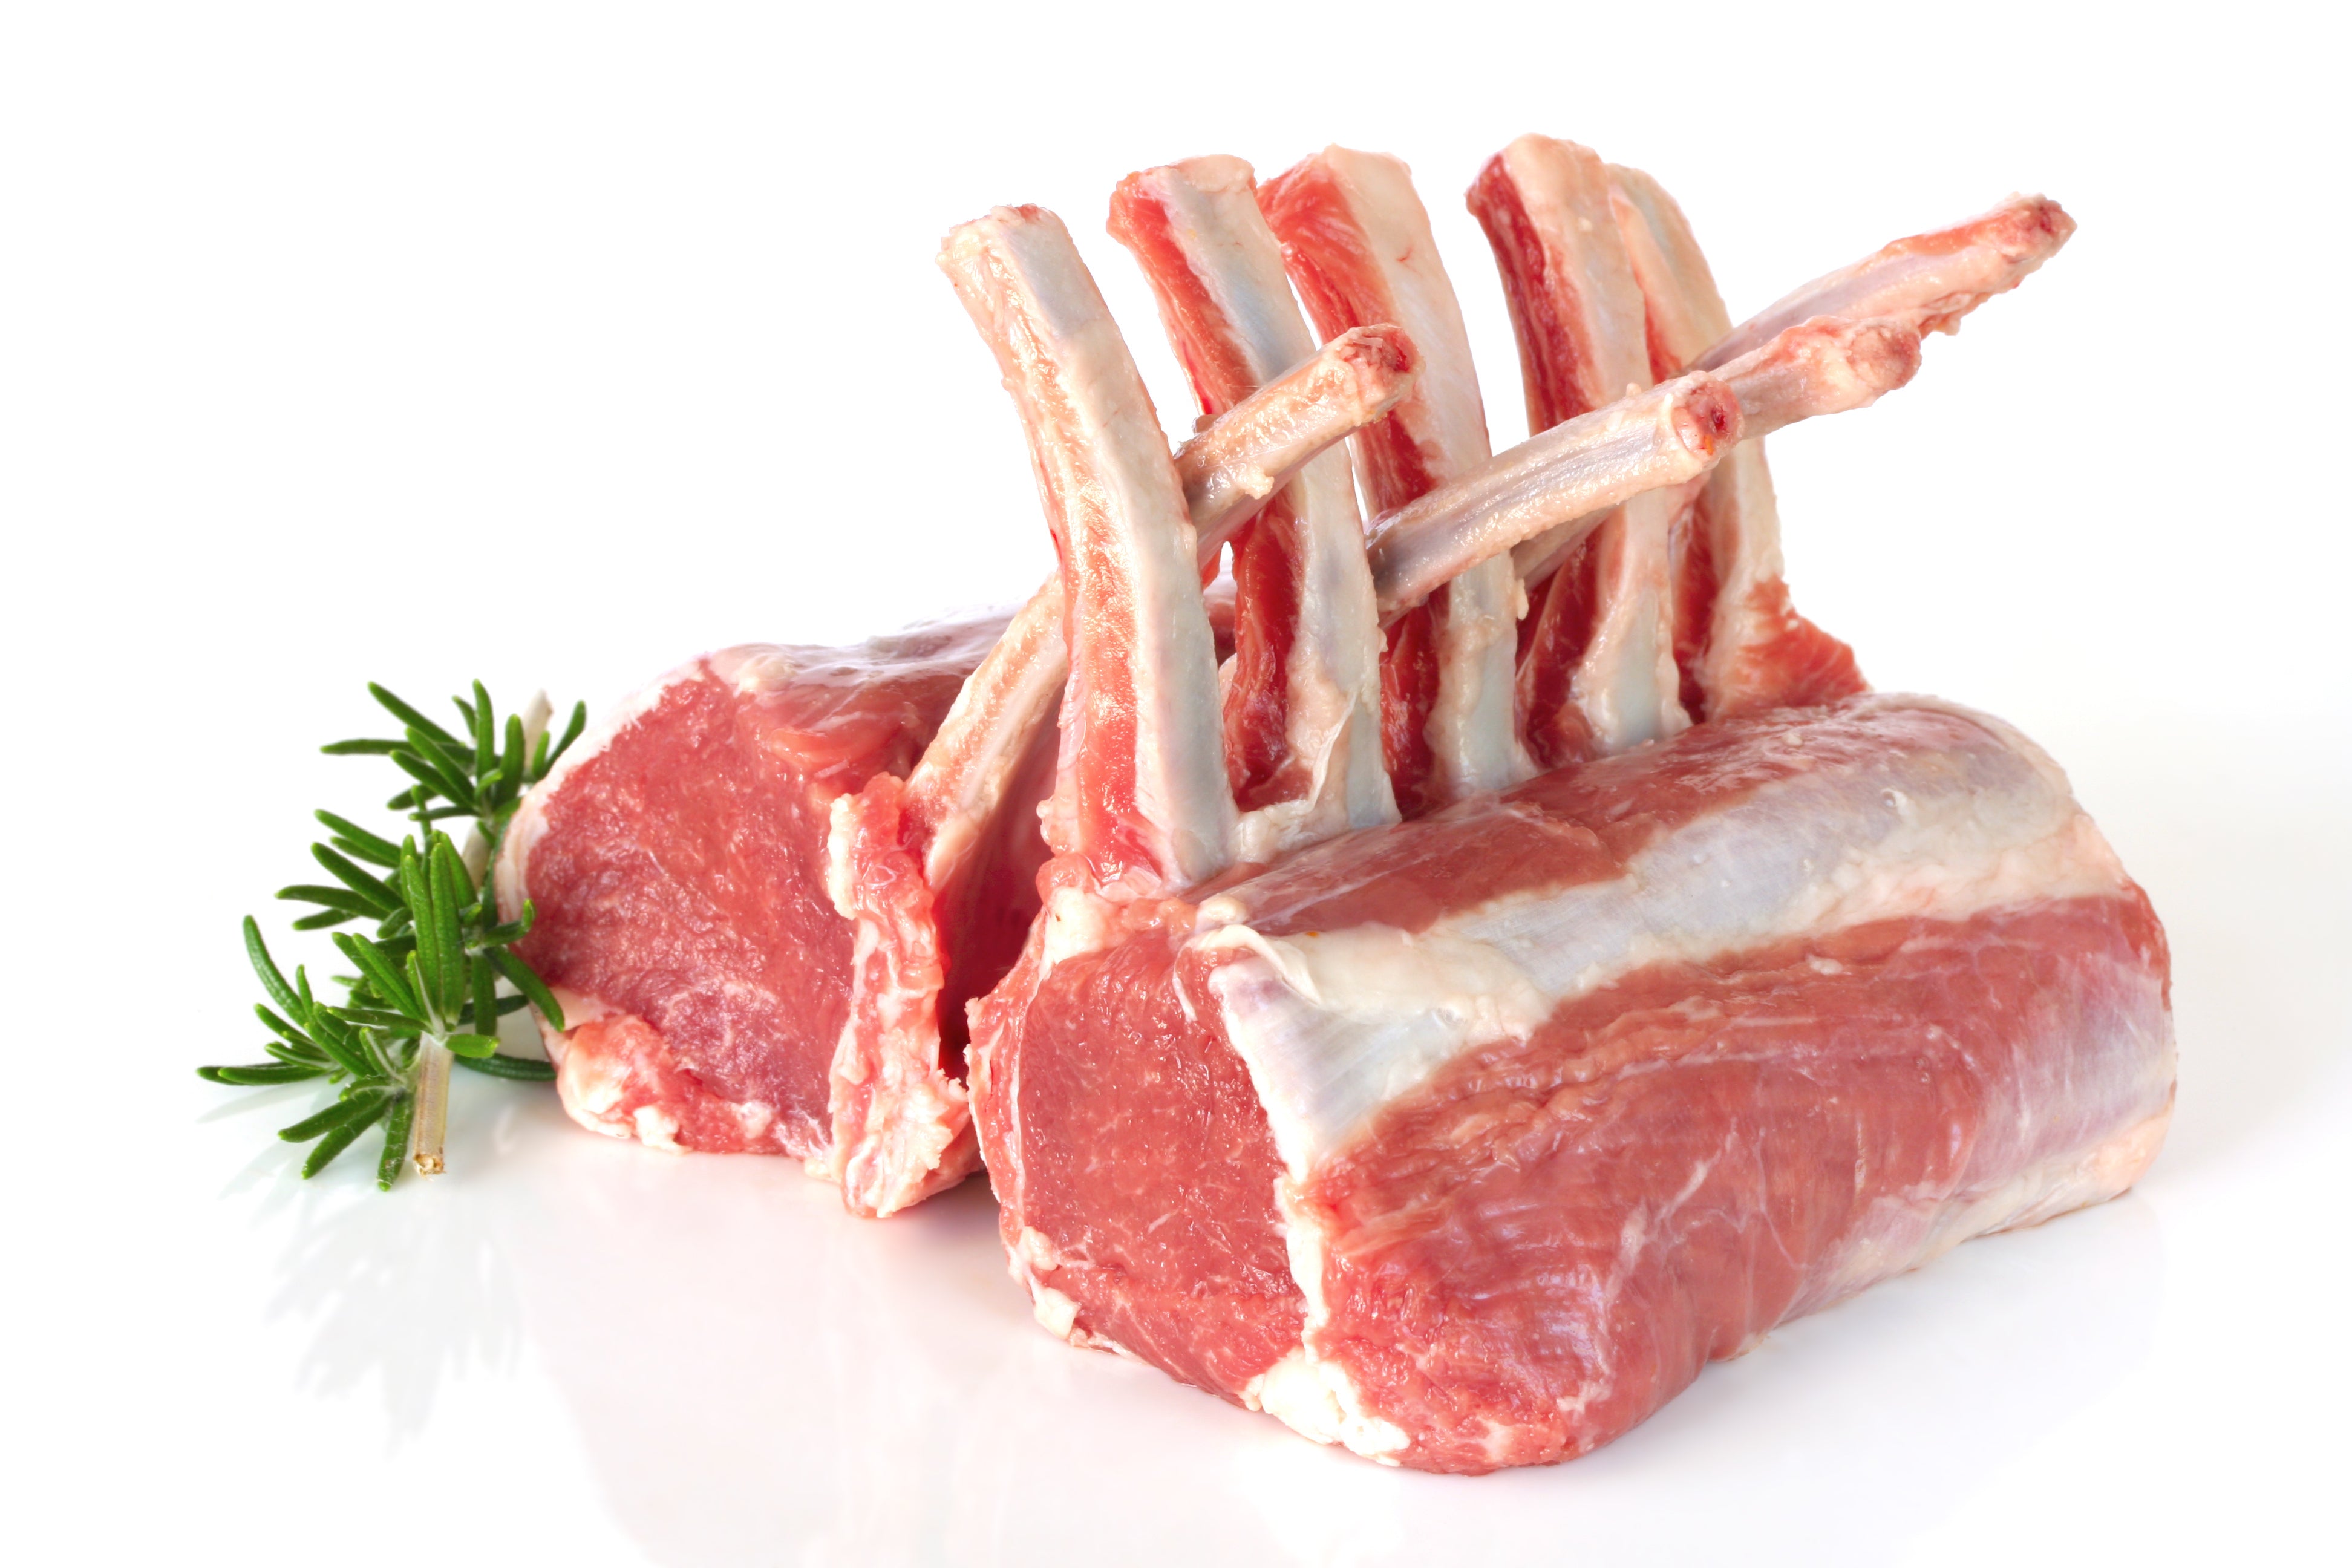 New Zealand Lamb And Its Role In Fighting Iron Deficiency